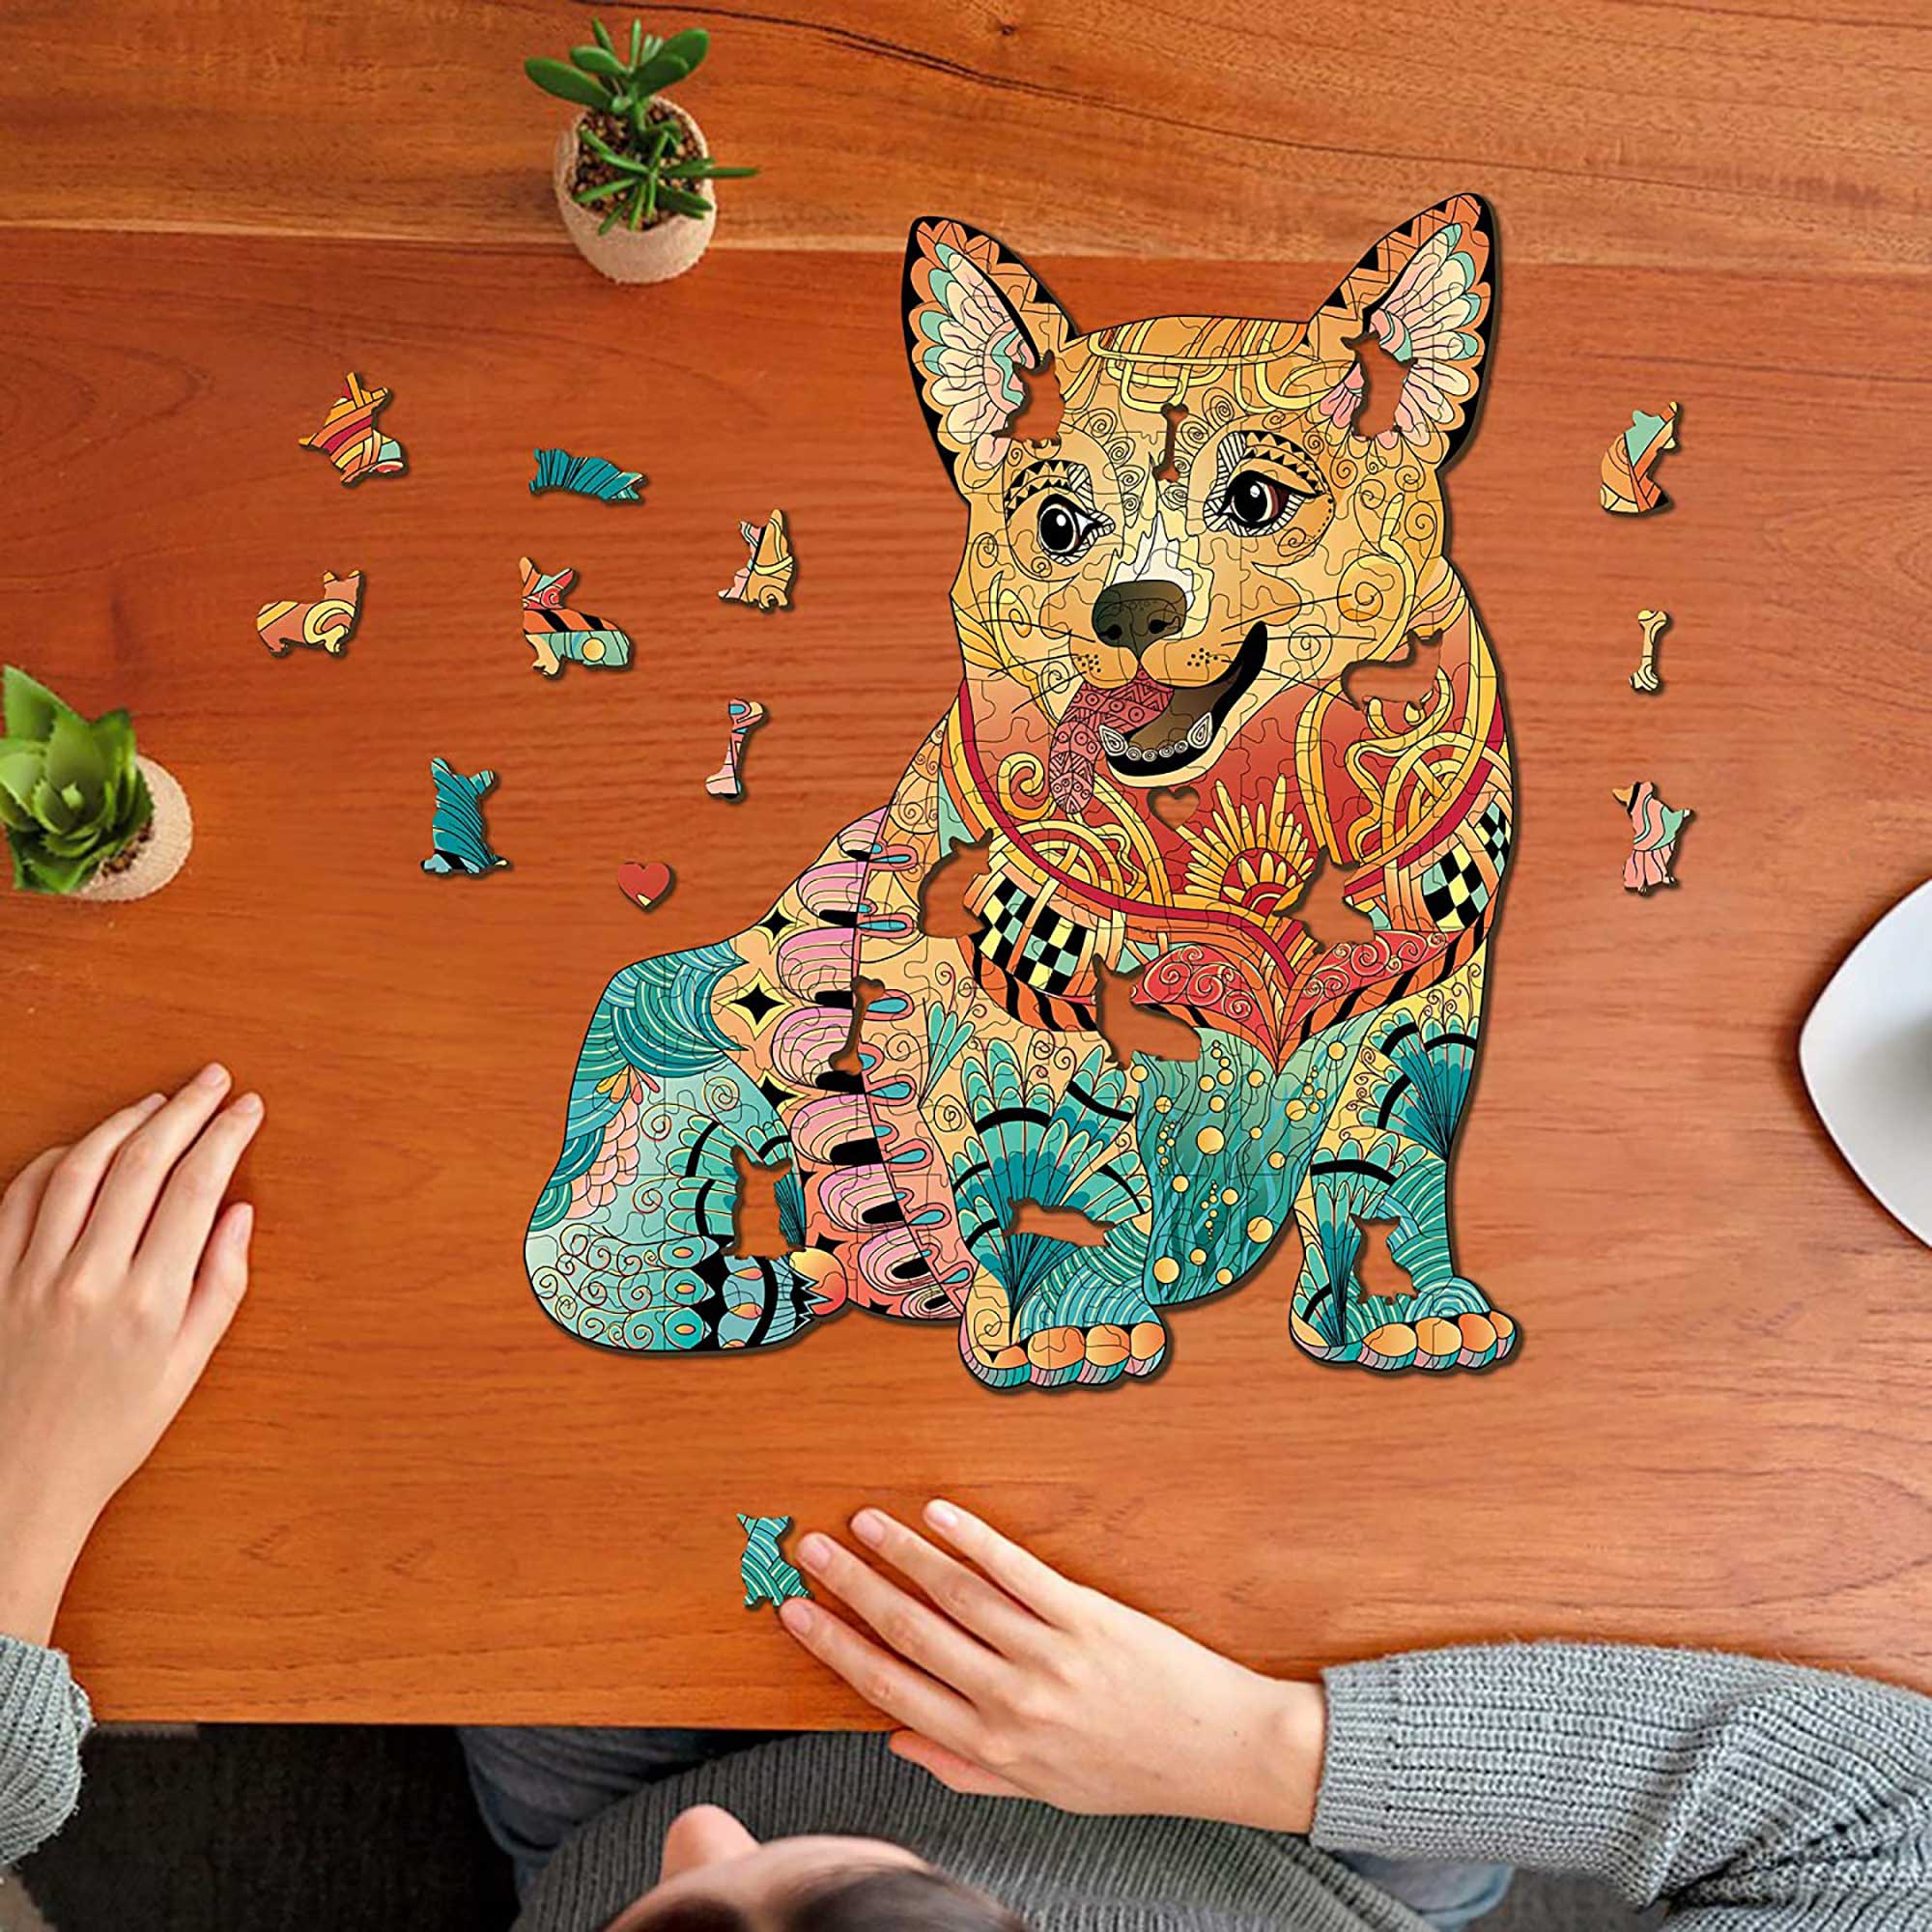 ZENWAWA Cute Corgi-Dog Jigsaw Puzzle, 1000 Pieces Paper Wood Composite  Material Zigsaw with Storage Bag and Reference Picture Easy to Solve